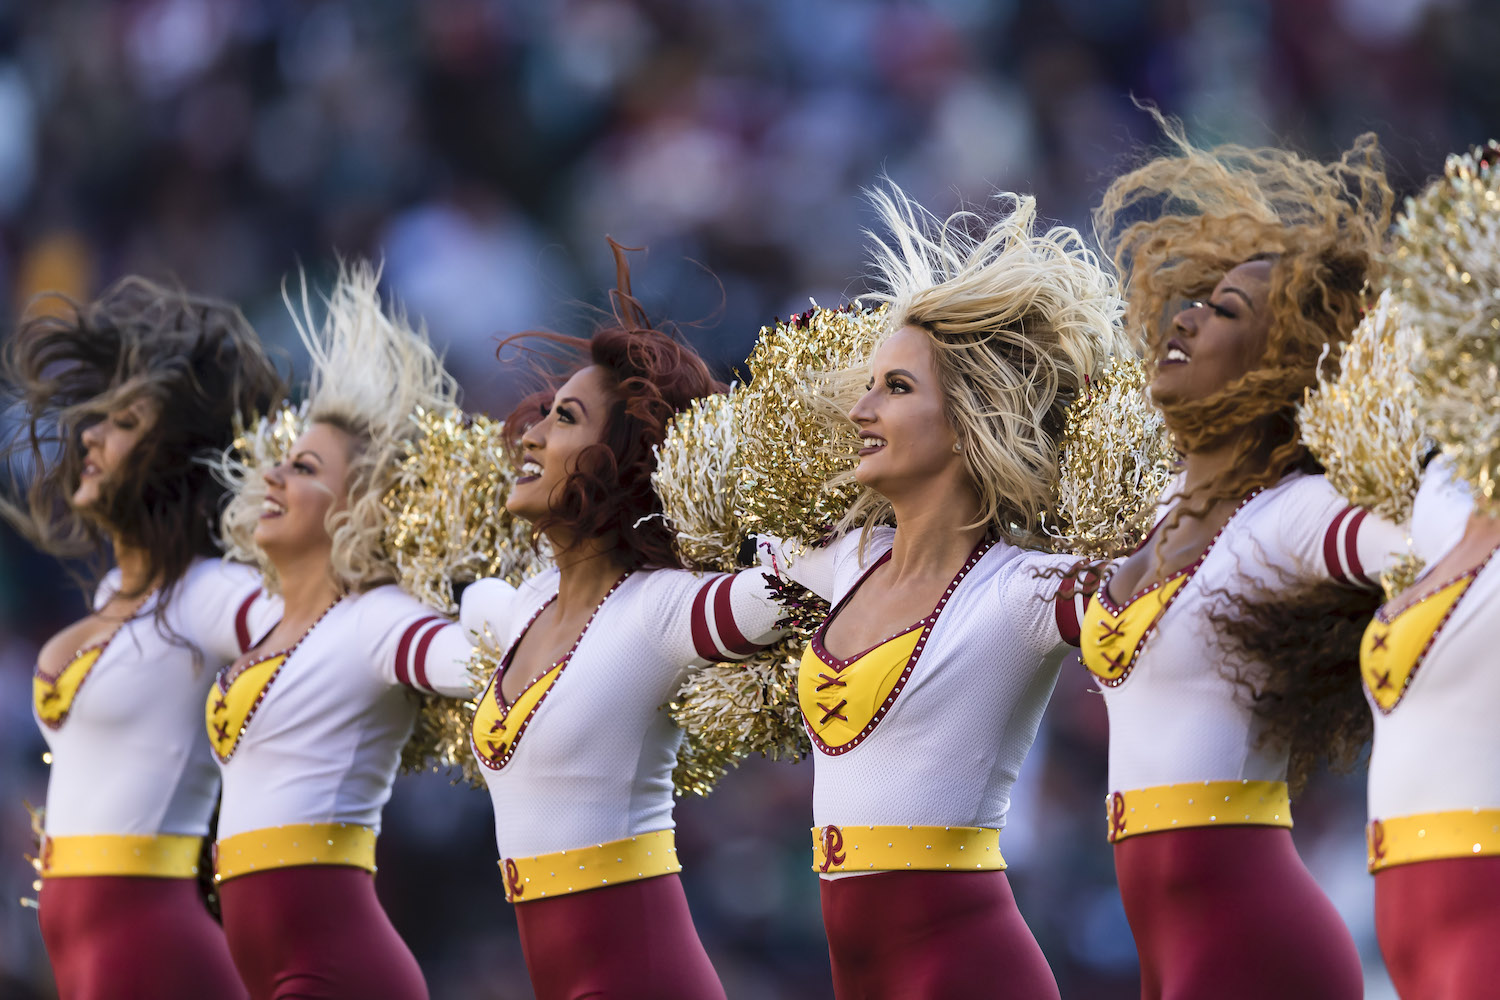 Xxx Nfl Cheerleaders - Washington Cheerleaders 'Pimped Out' and Naked Photo Shoots: Haven't We  Been Here Before?